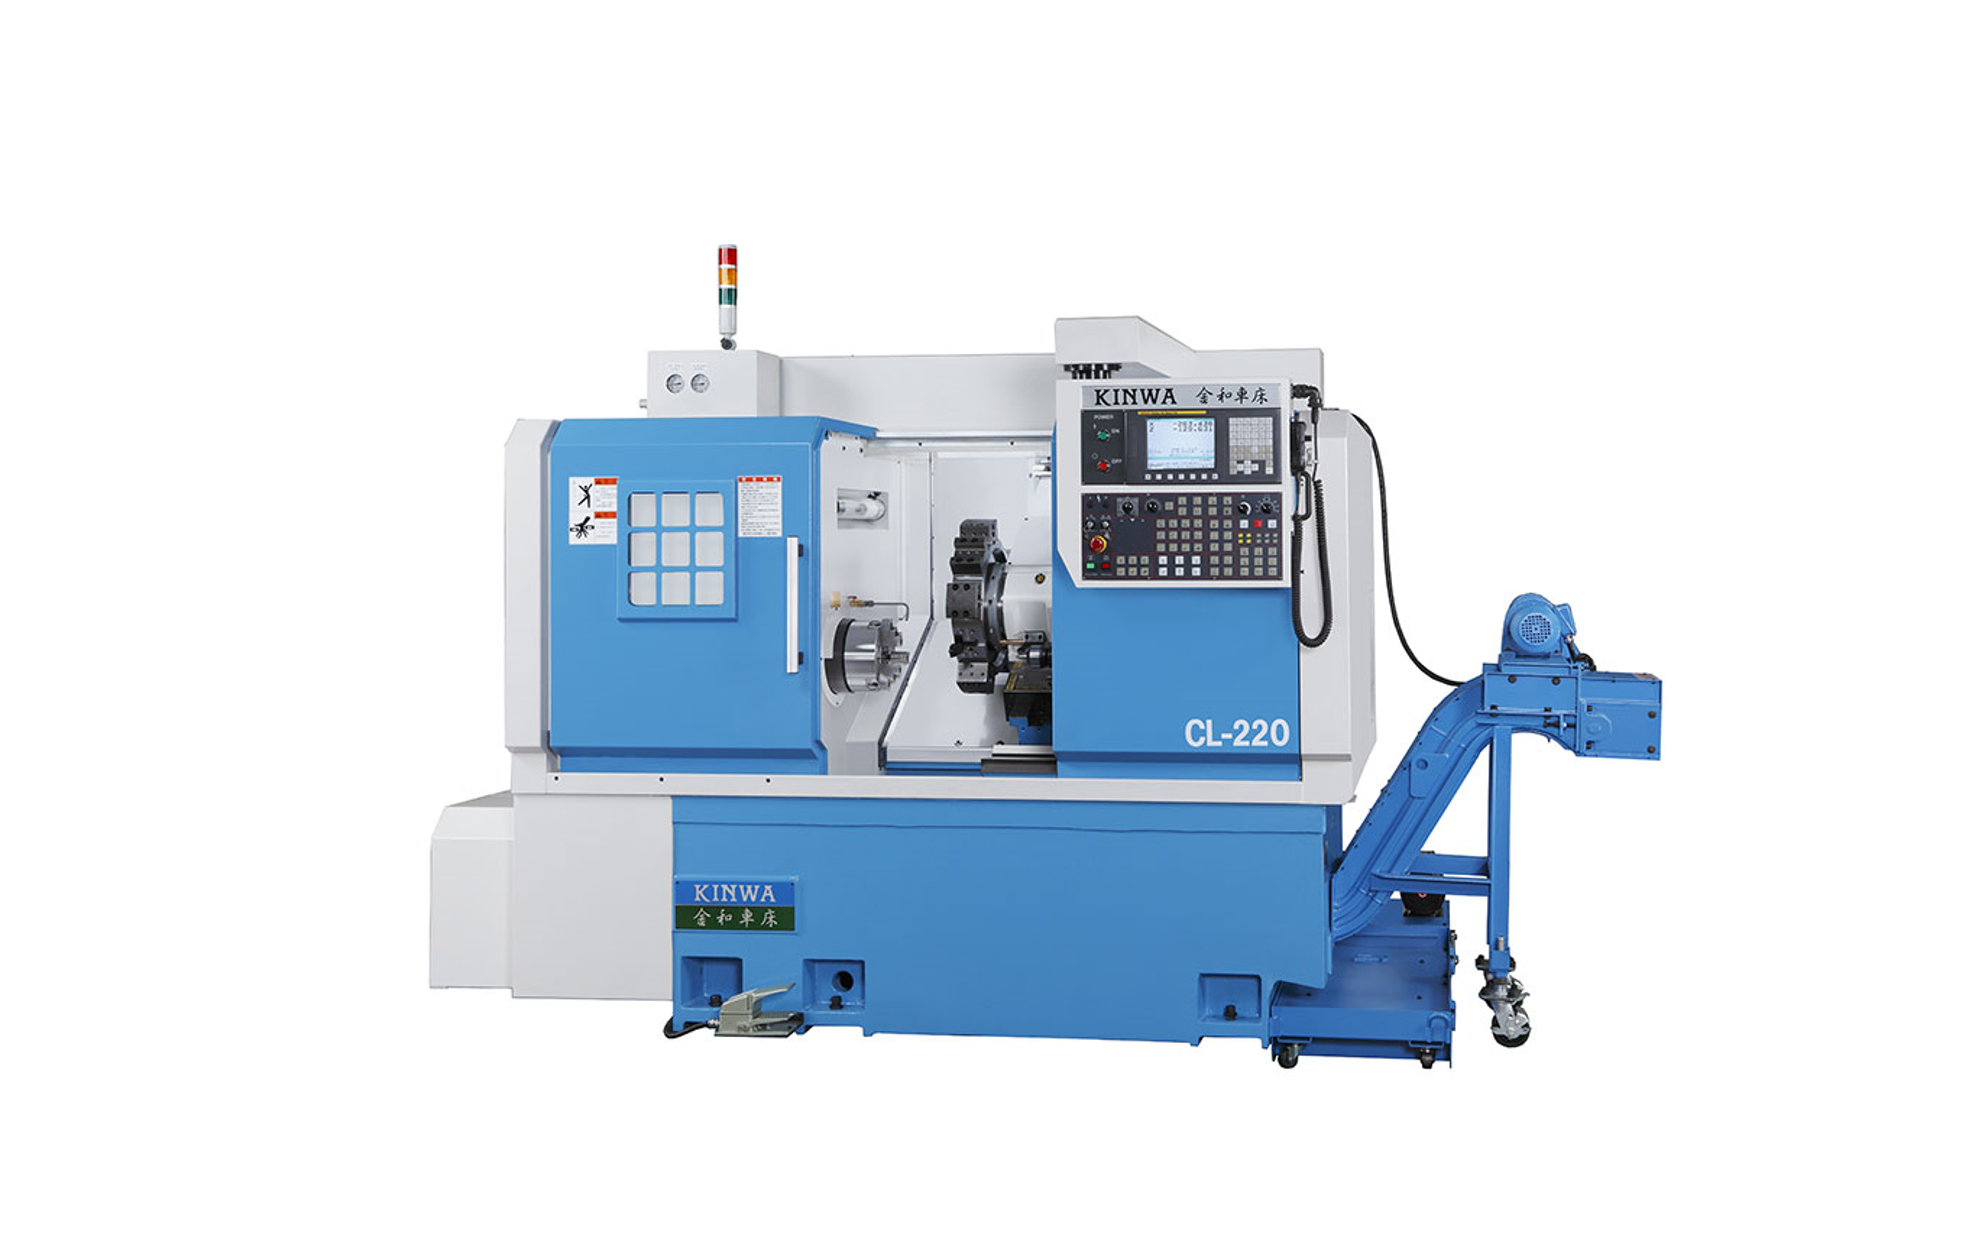 News|KINWA LATHE: Rooted in High-Speed Lathes and Moving towards Automated CNC Lathes